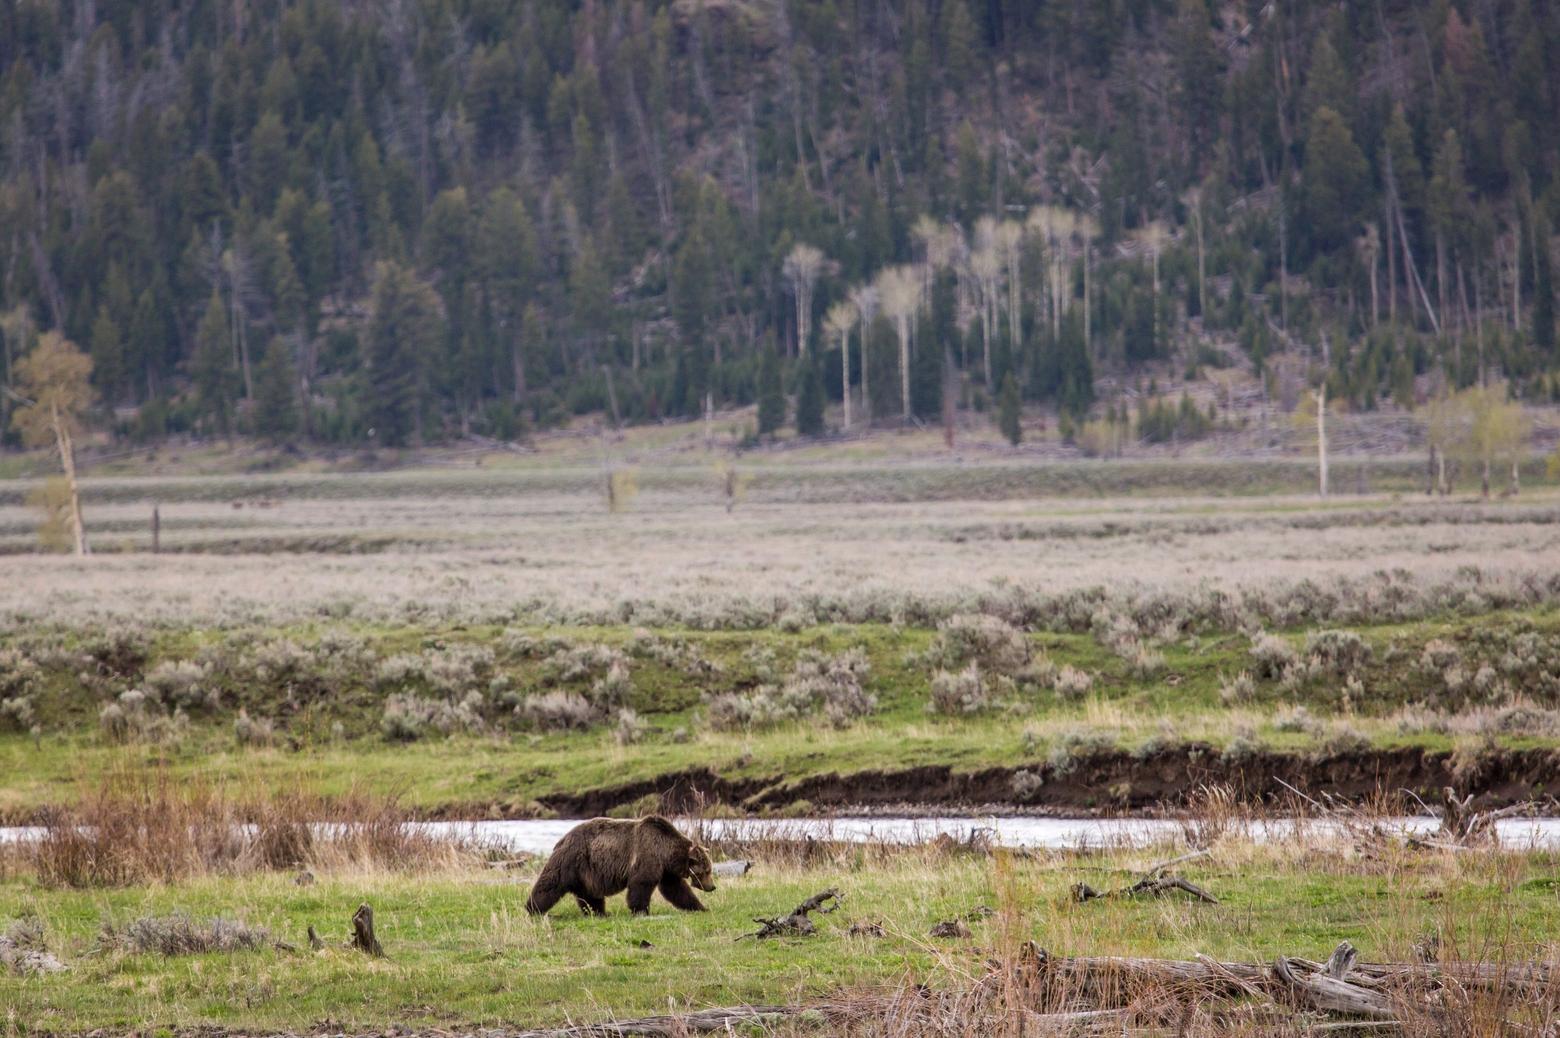 Grizzly 211, aka Scarface, ambles across Yellowstone National Park's Lamar Valley. The famous Yellowstone grizzly was 25 years old when it was shot and killed by an elk hunter in 2015 outside the park near Gardiner, Montana. Photo by Neal Herbert/NPS